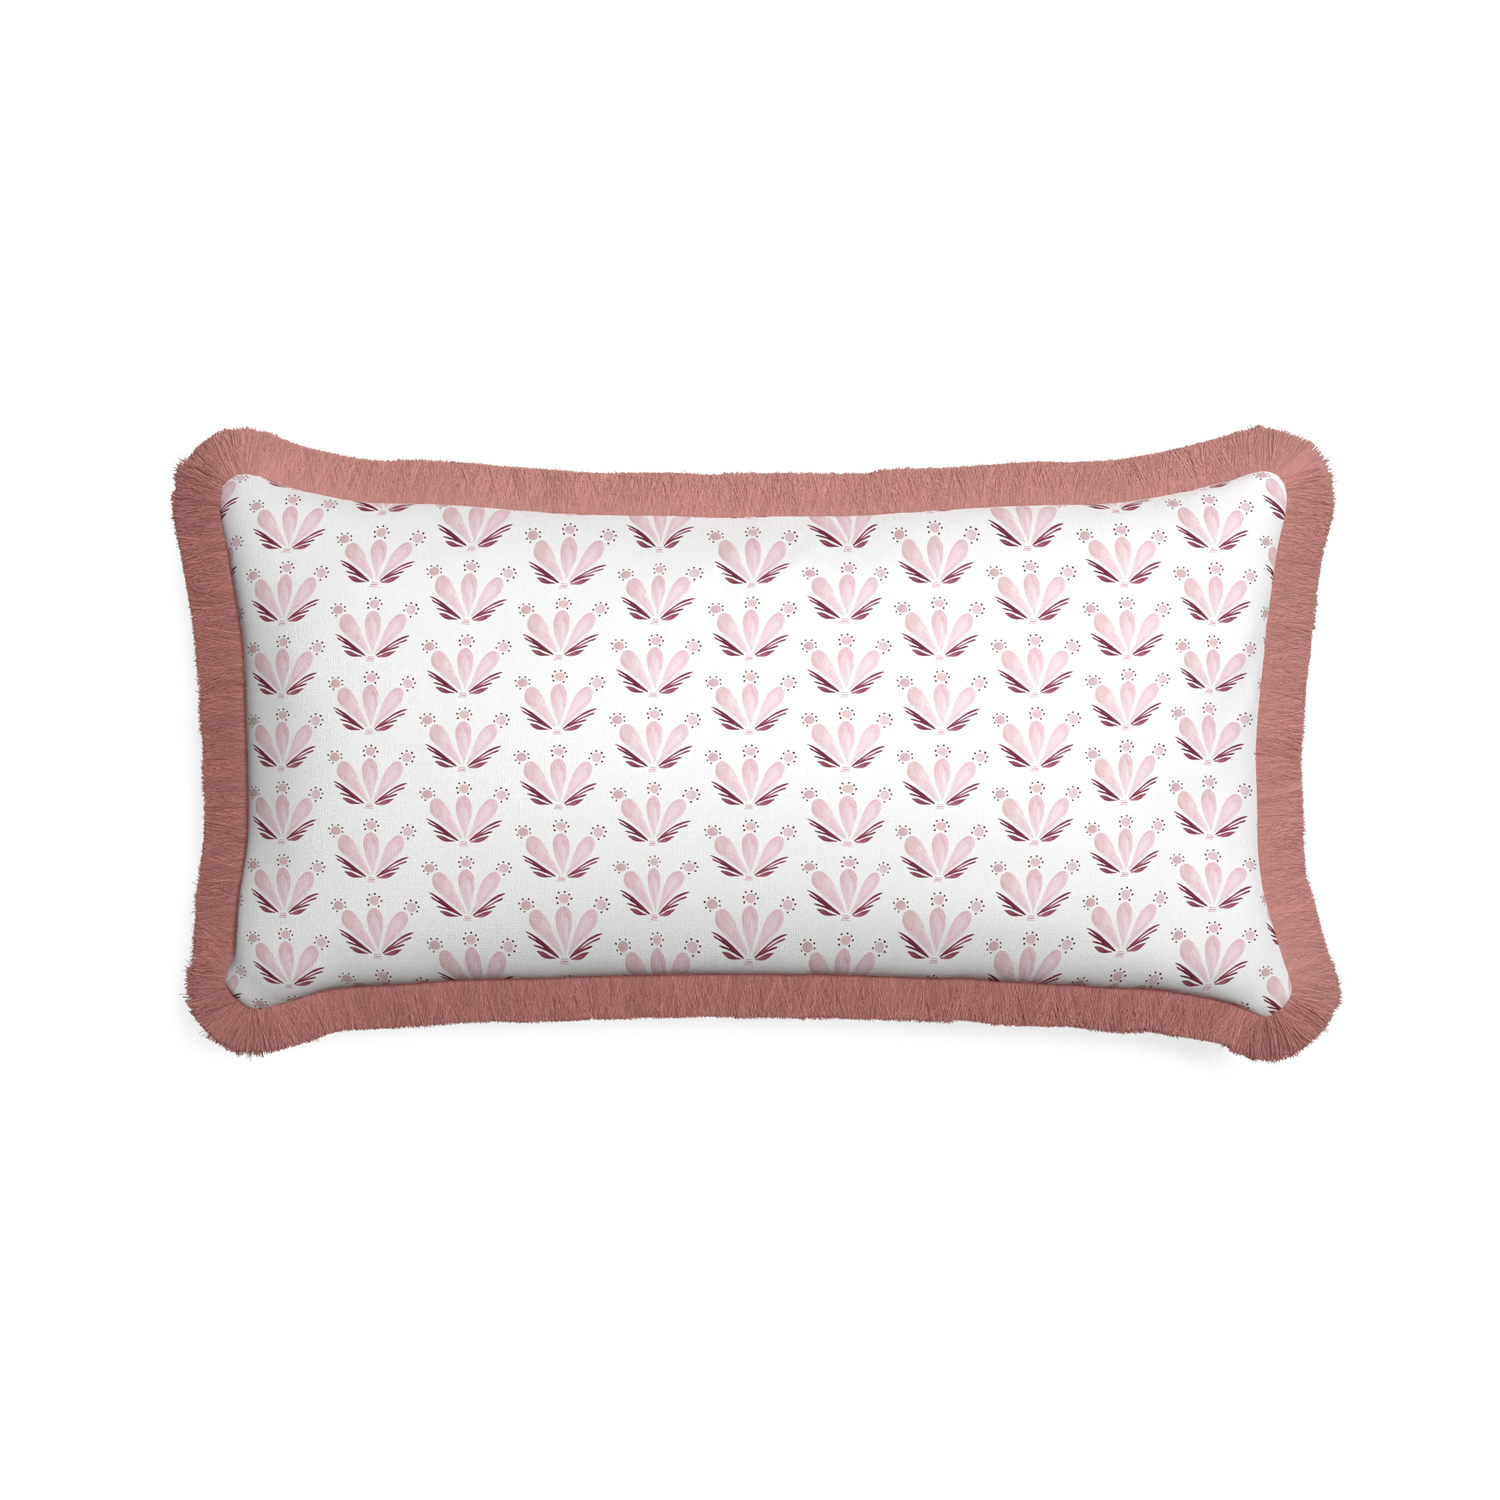 Midi-lumbar serena pink custom pink & burgundy drop repeat floralpillow with d fringe on white background